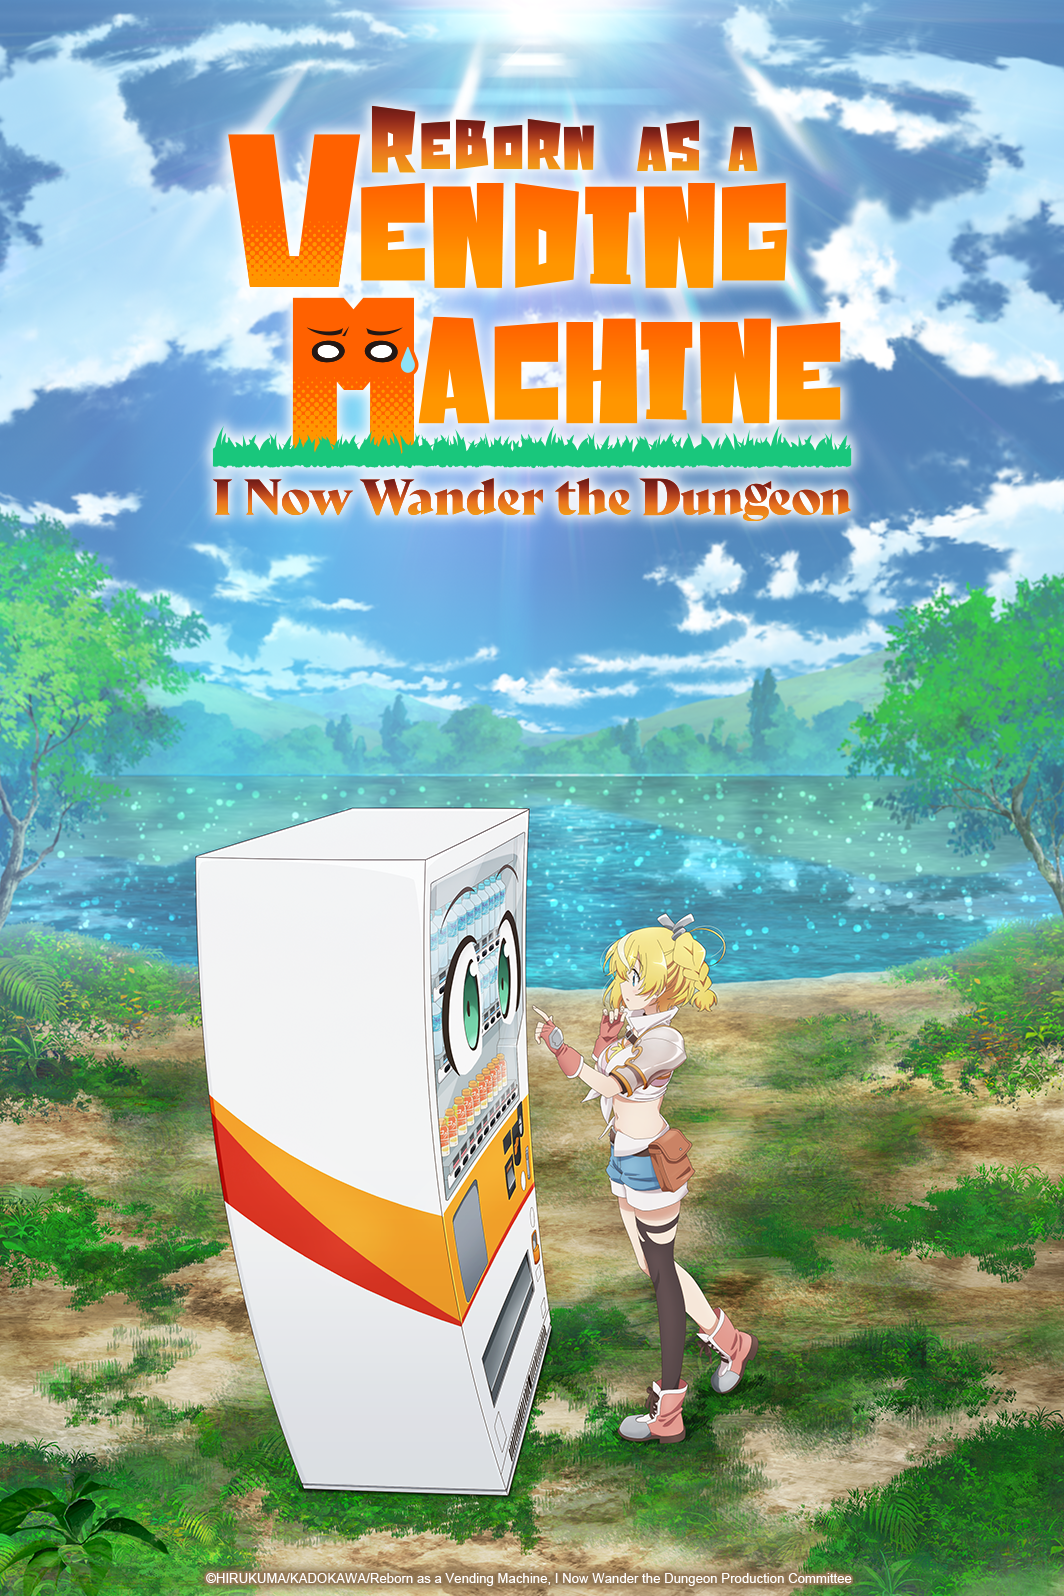 Reborn as a Vending Machine, I Now Wander the Dungeon - Wikipedia